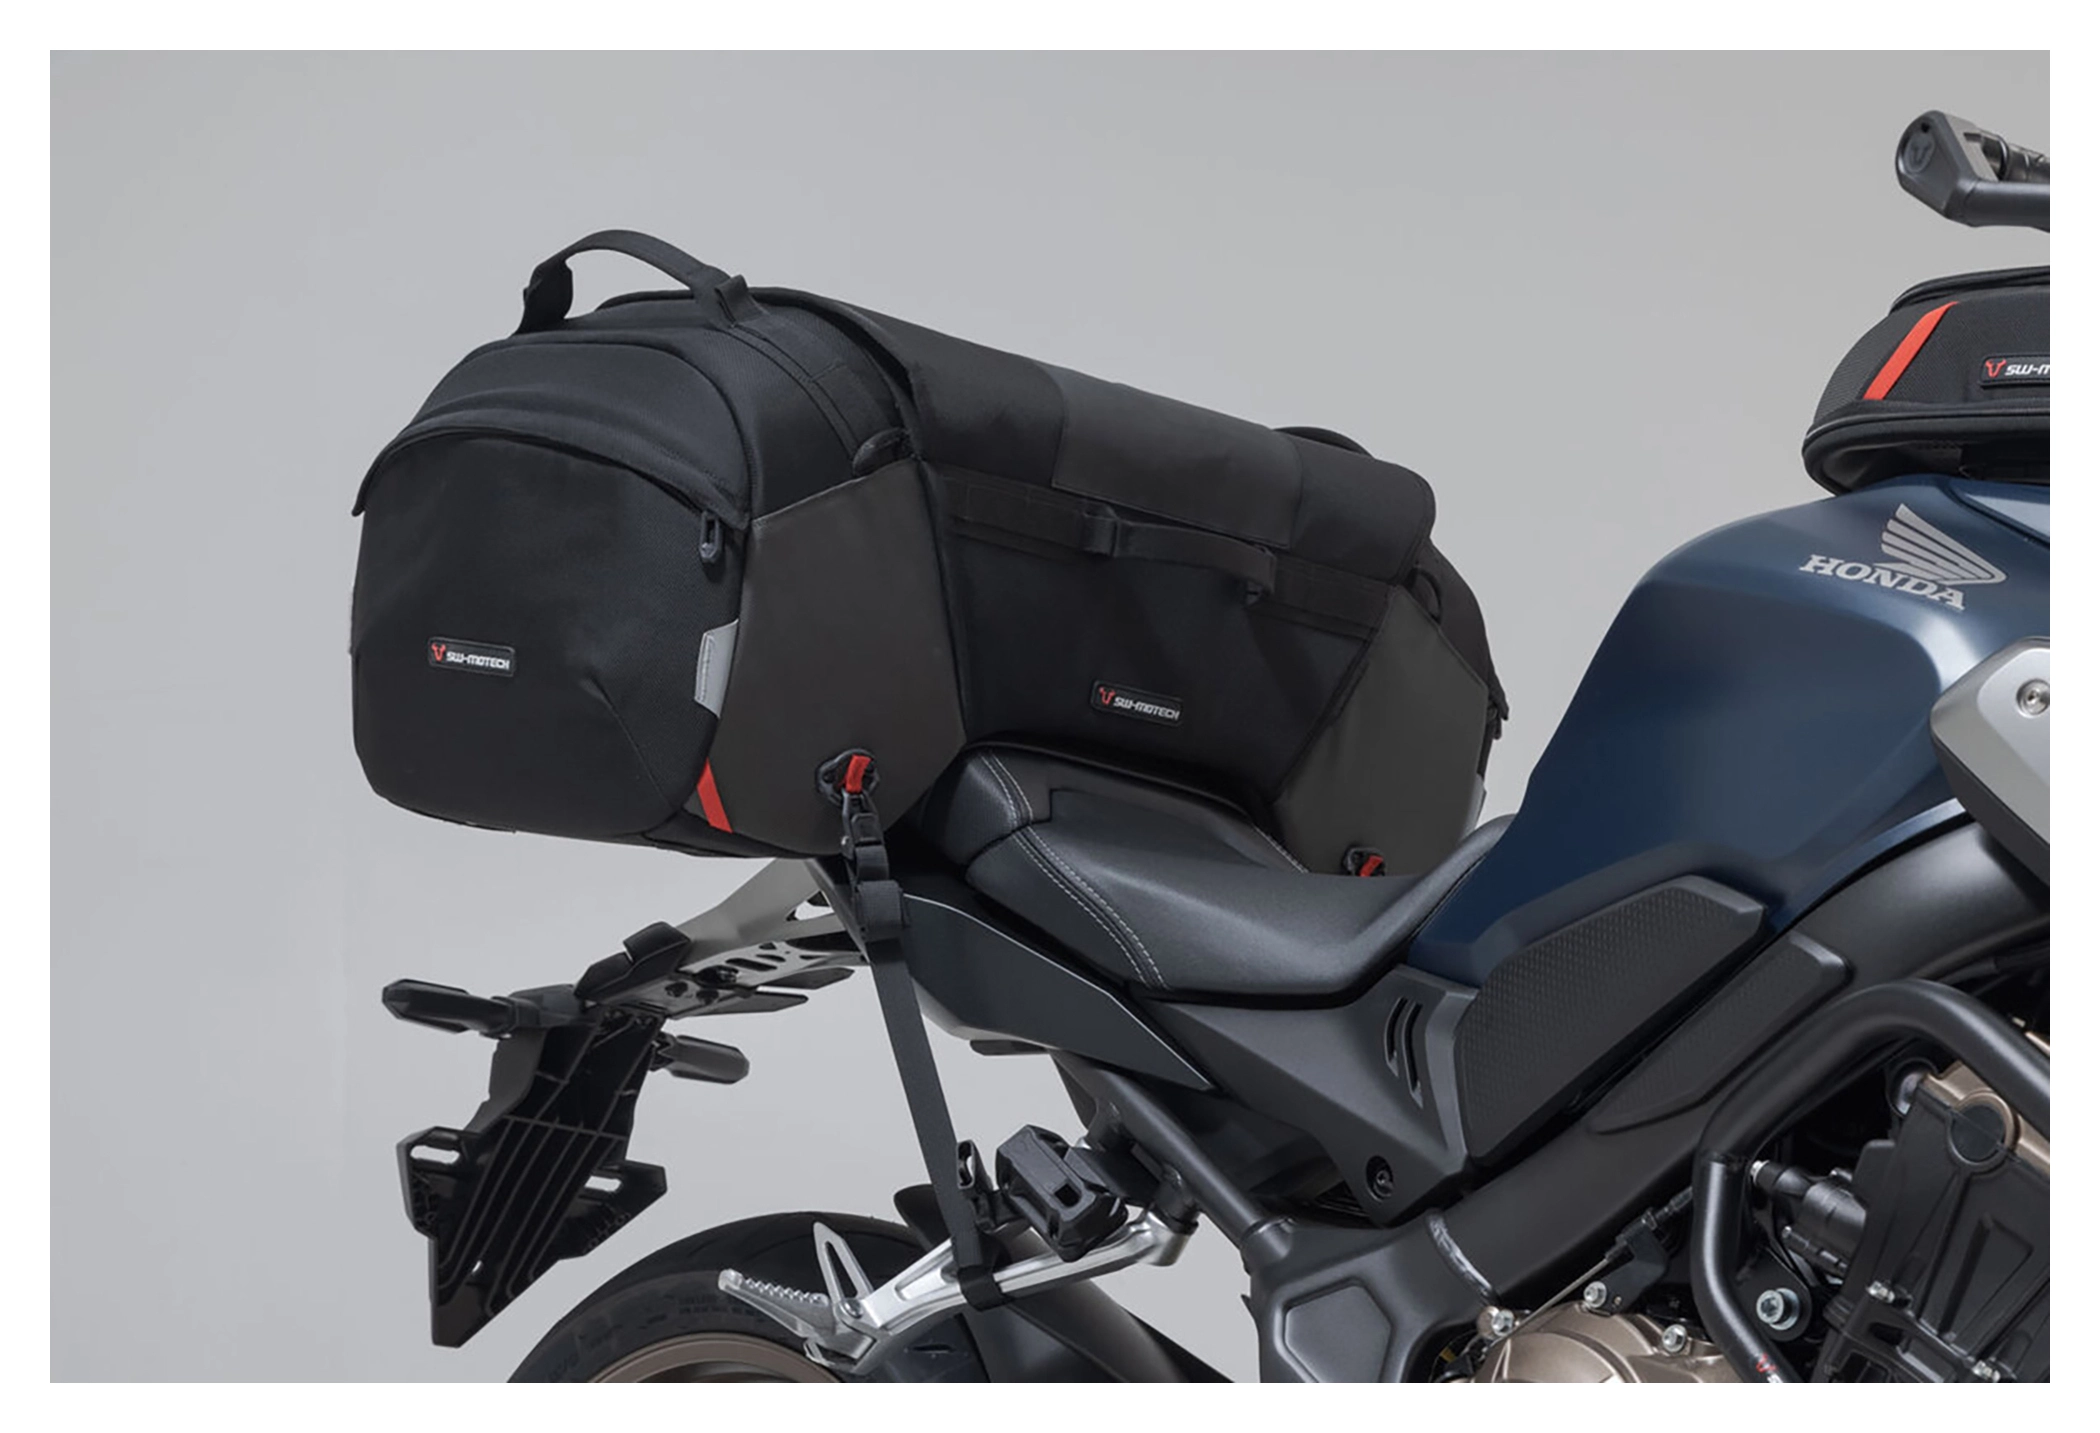 SW-Motech PRO TRAVELBAG TAIL BAG low-cost